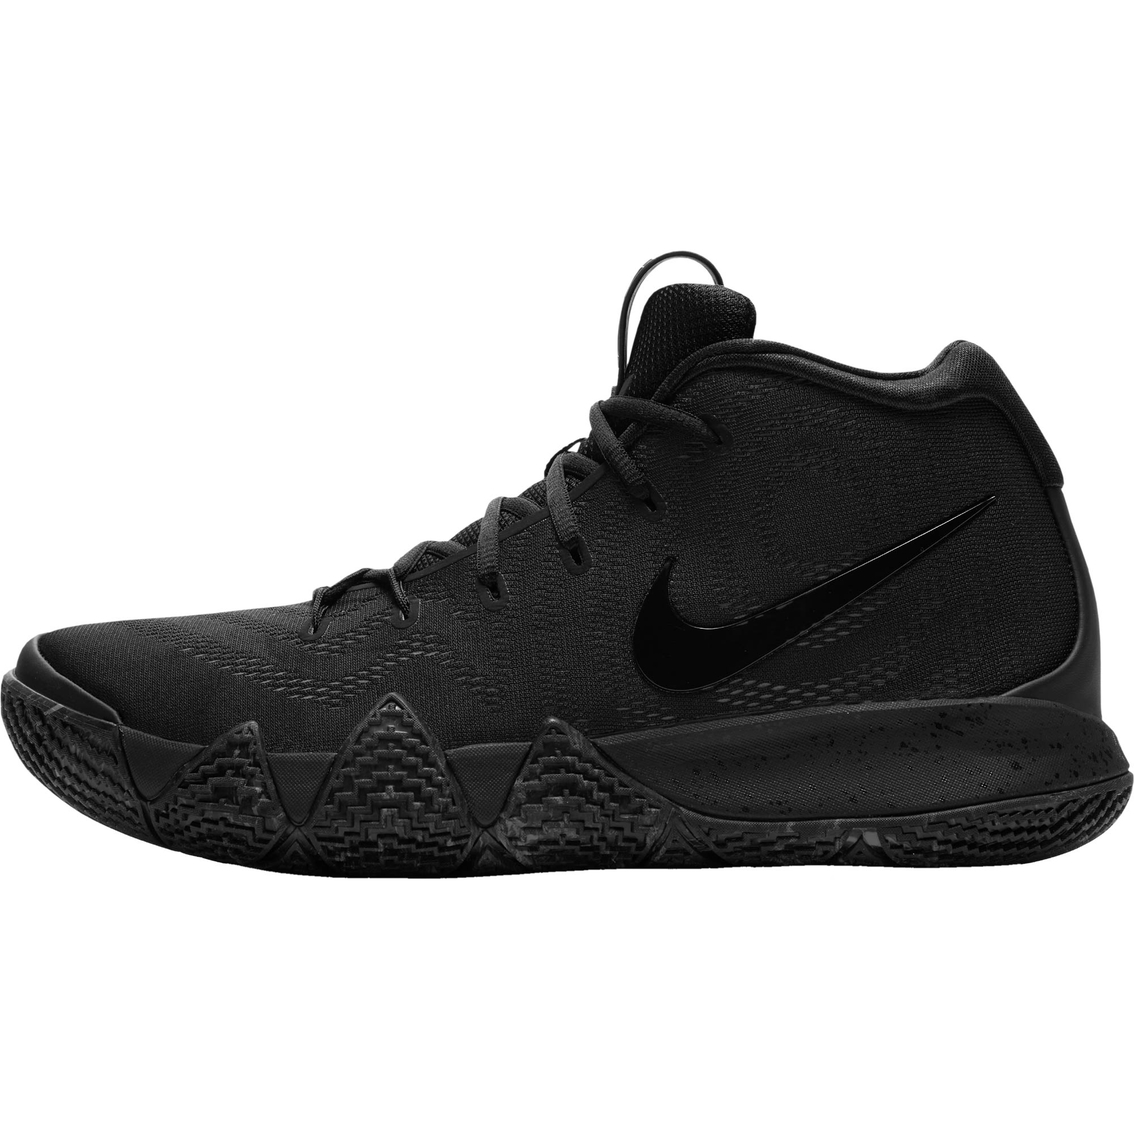 Nike Men's Kyrie 4 Basketball Shoes | Men's Athletic Shoes | Shoes ...